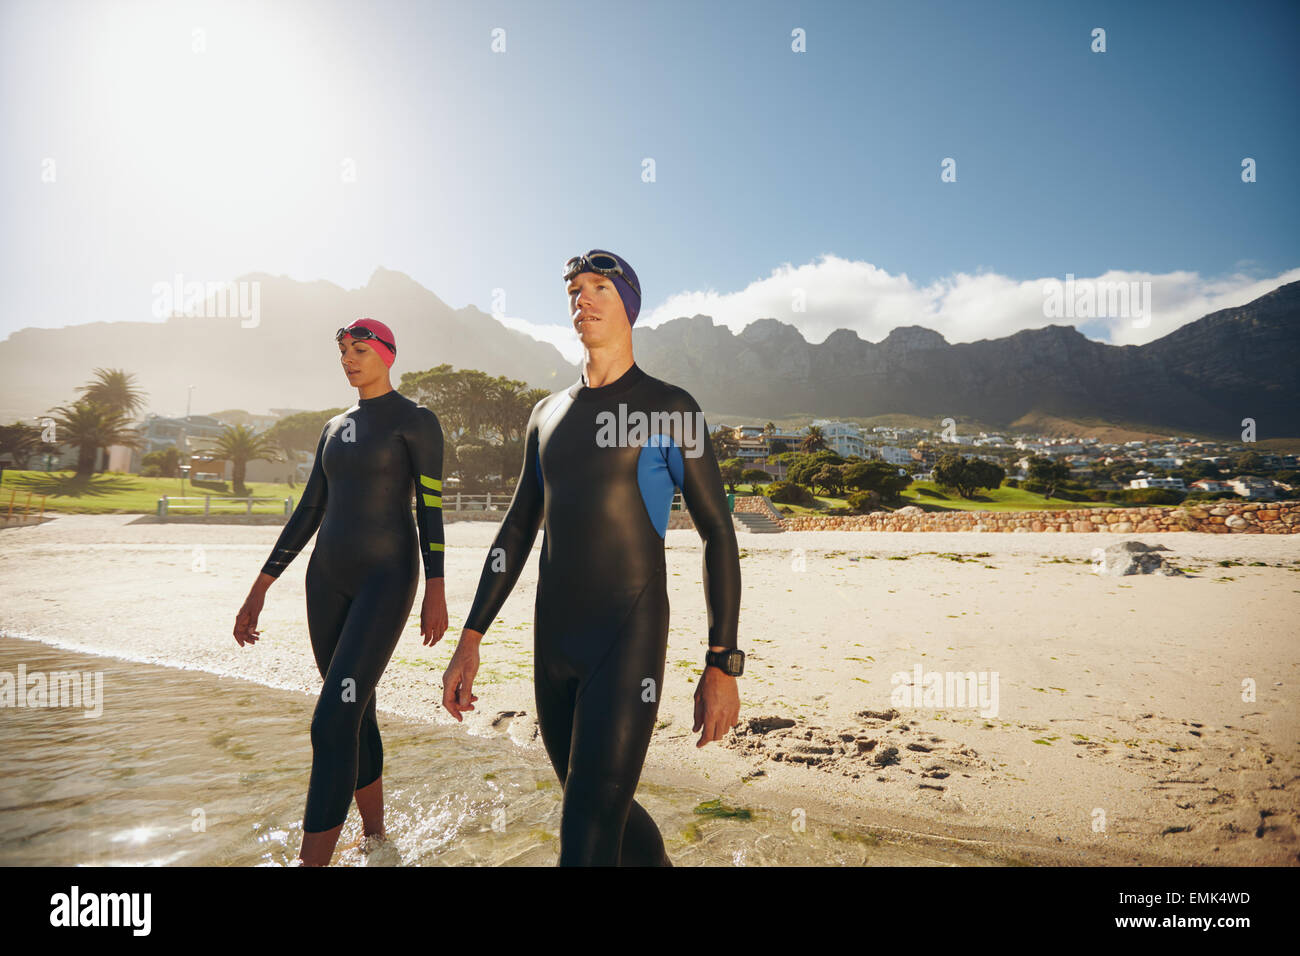 Image of two young triathletes walking into the sea wearing wetsuit. Man and woman doing triathlon training at the beach. Stock Photo